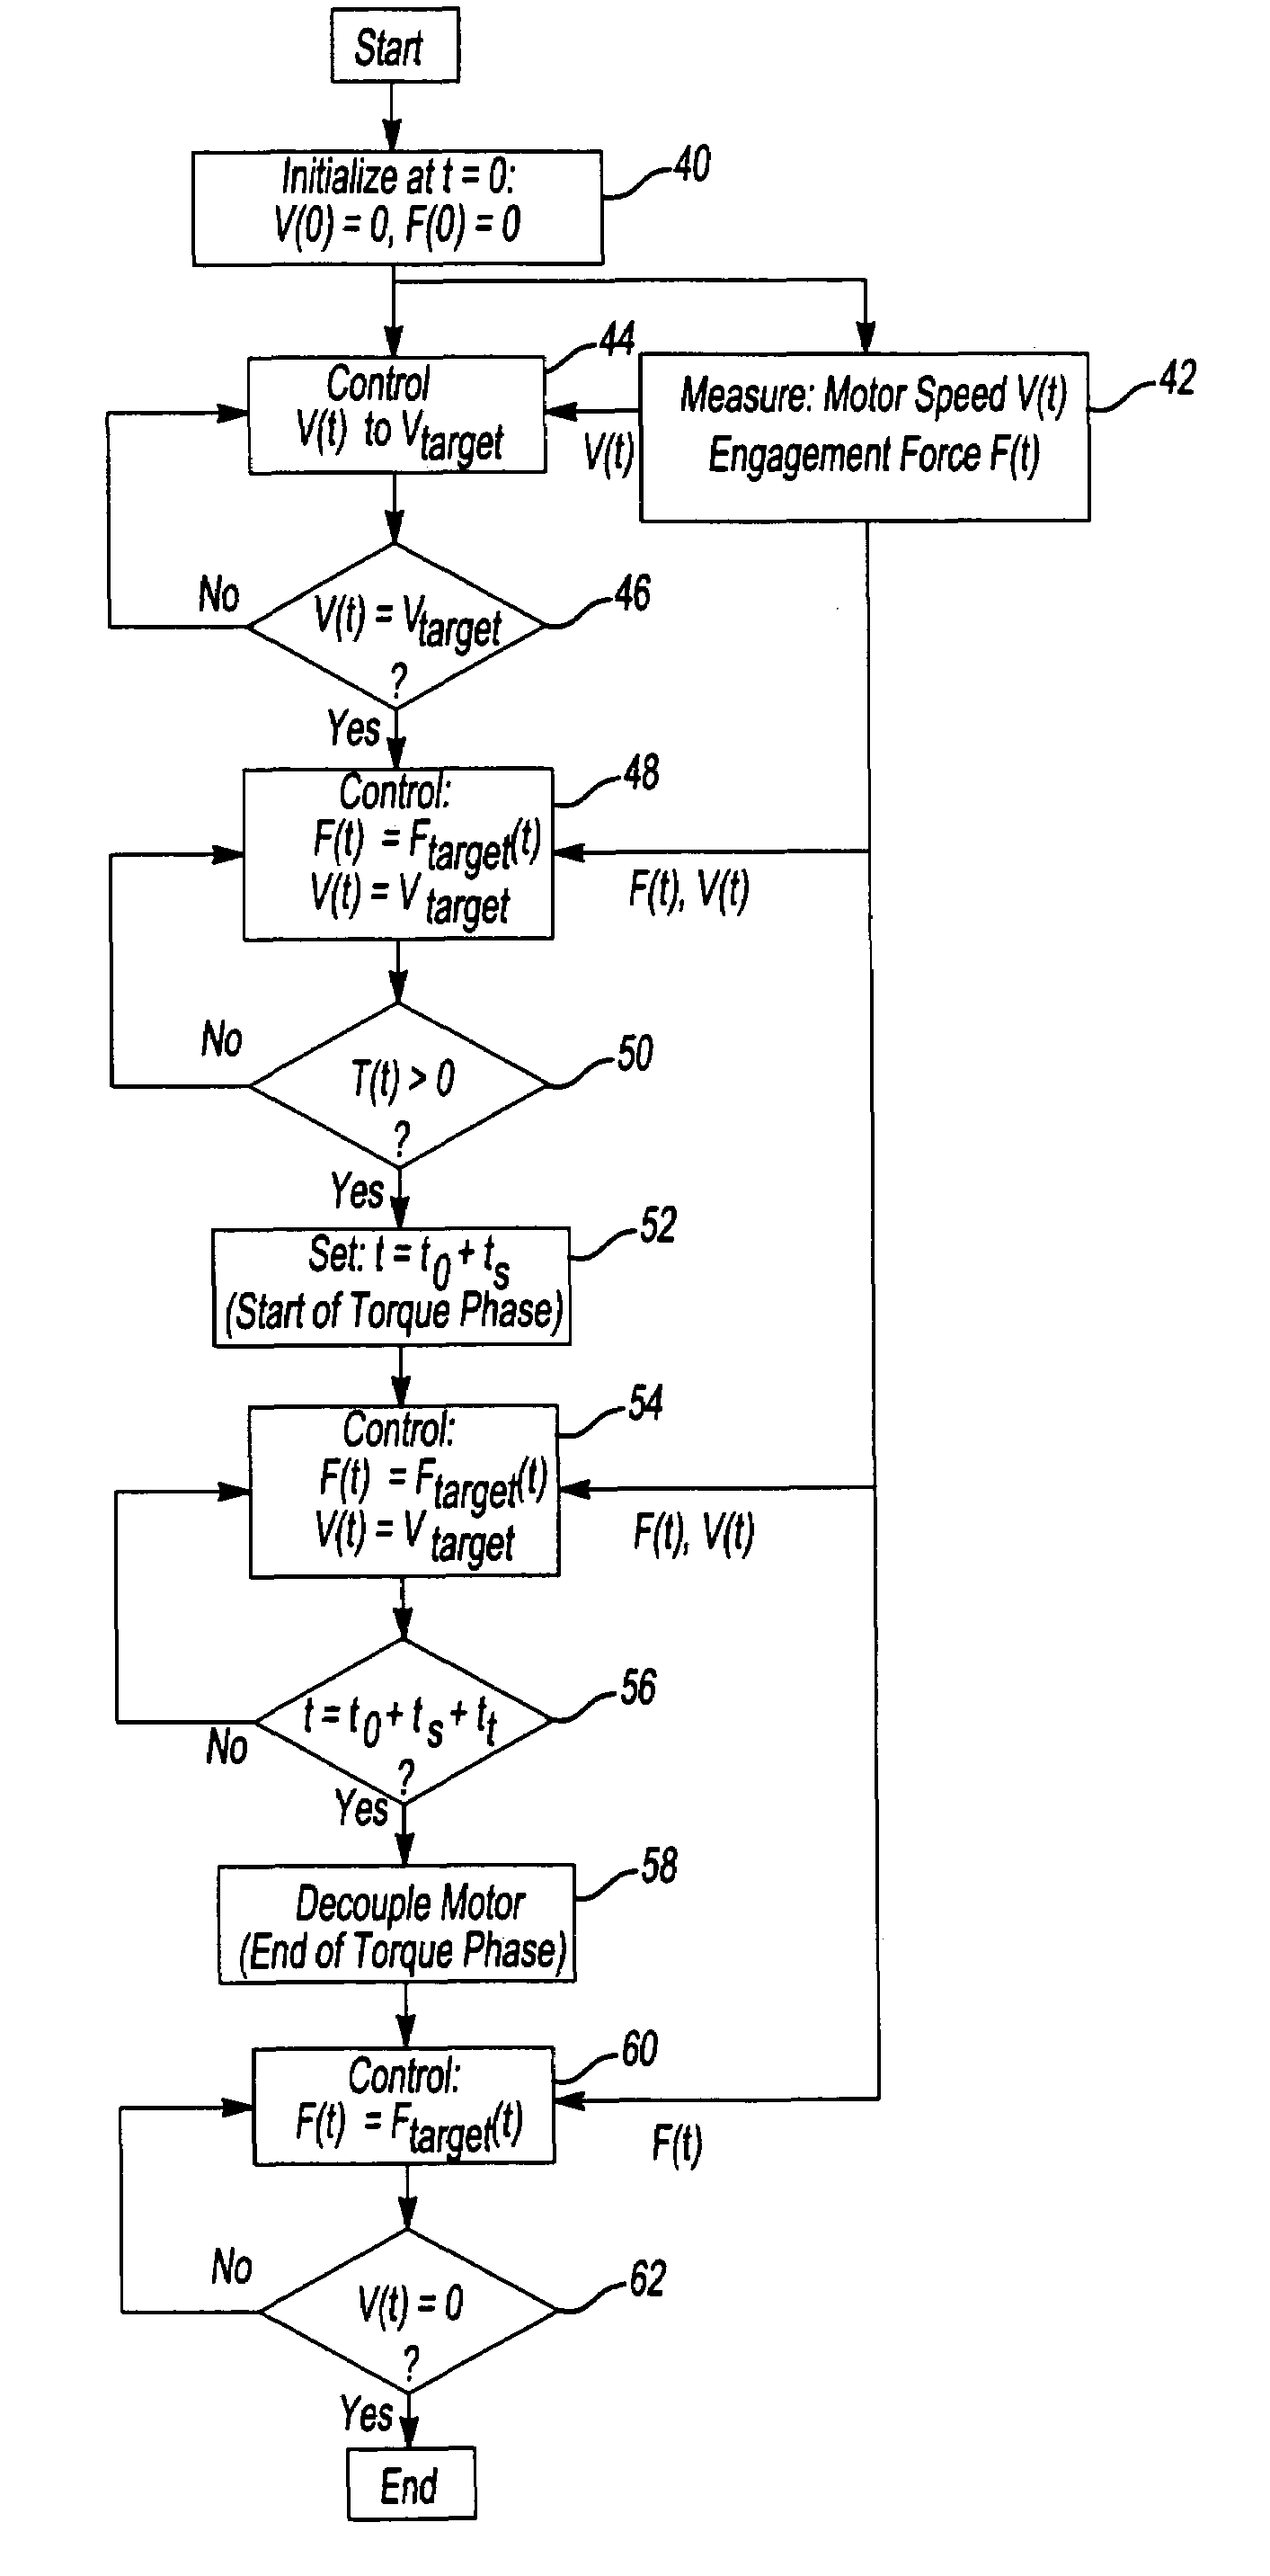 Method of testing friction components for automatic transmissions